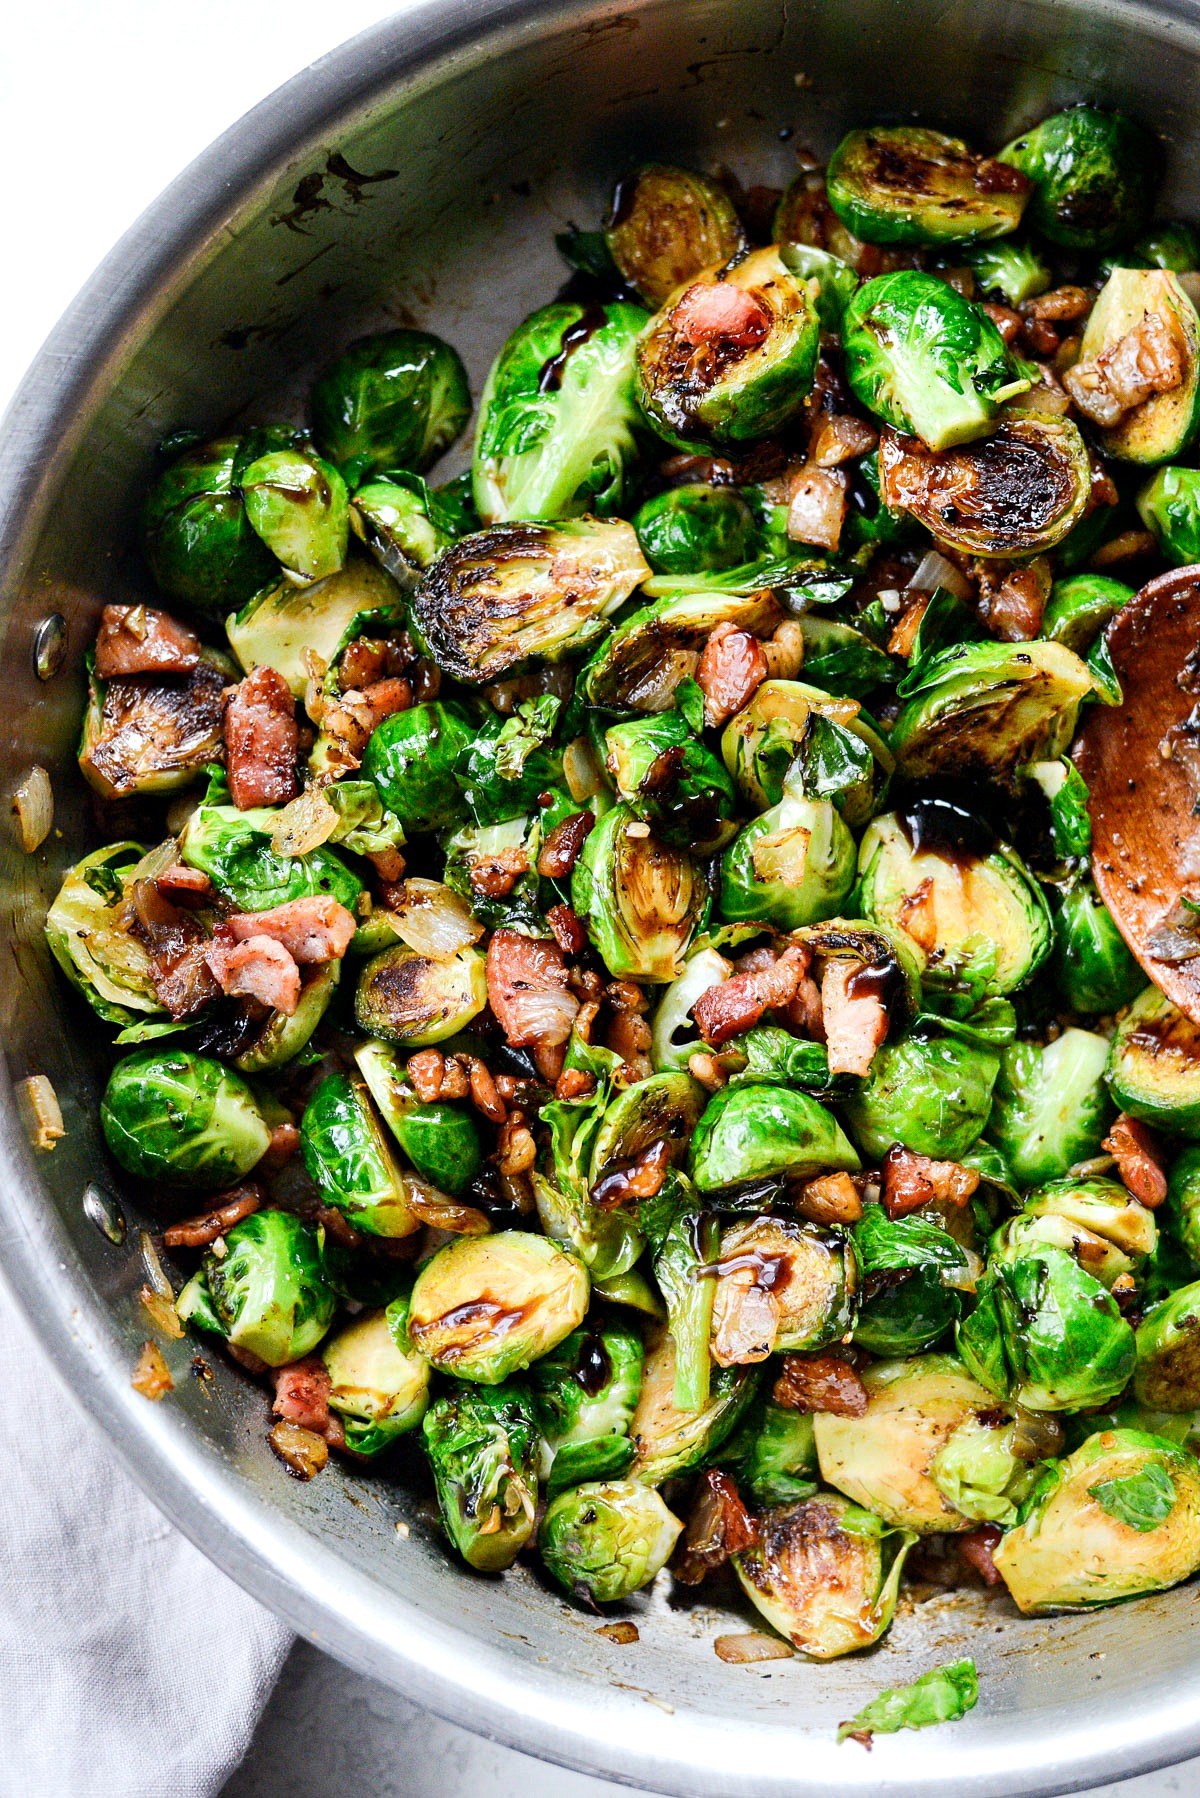 Caramelized Balsamic Glazed Brussels Sprouts - Simply Scratch